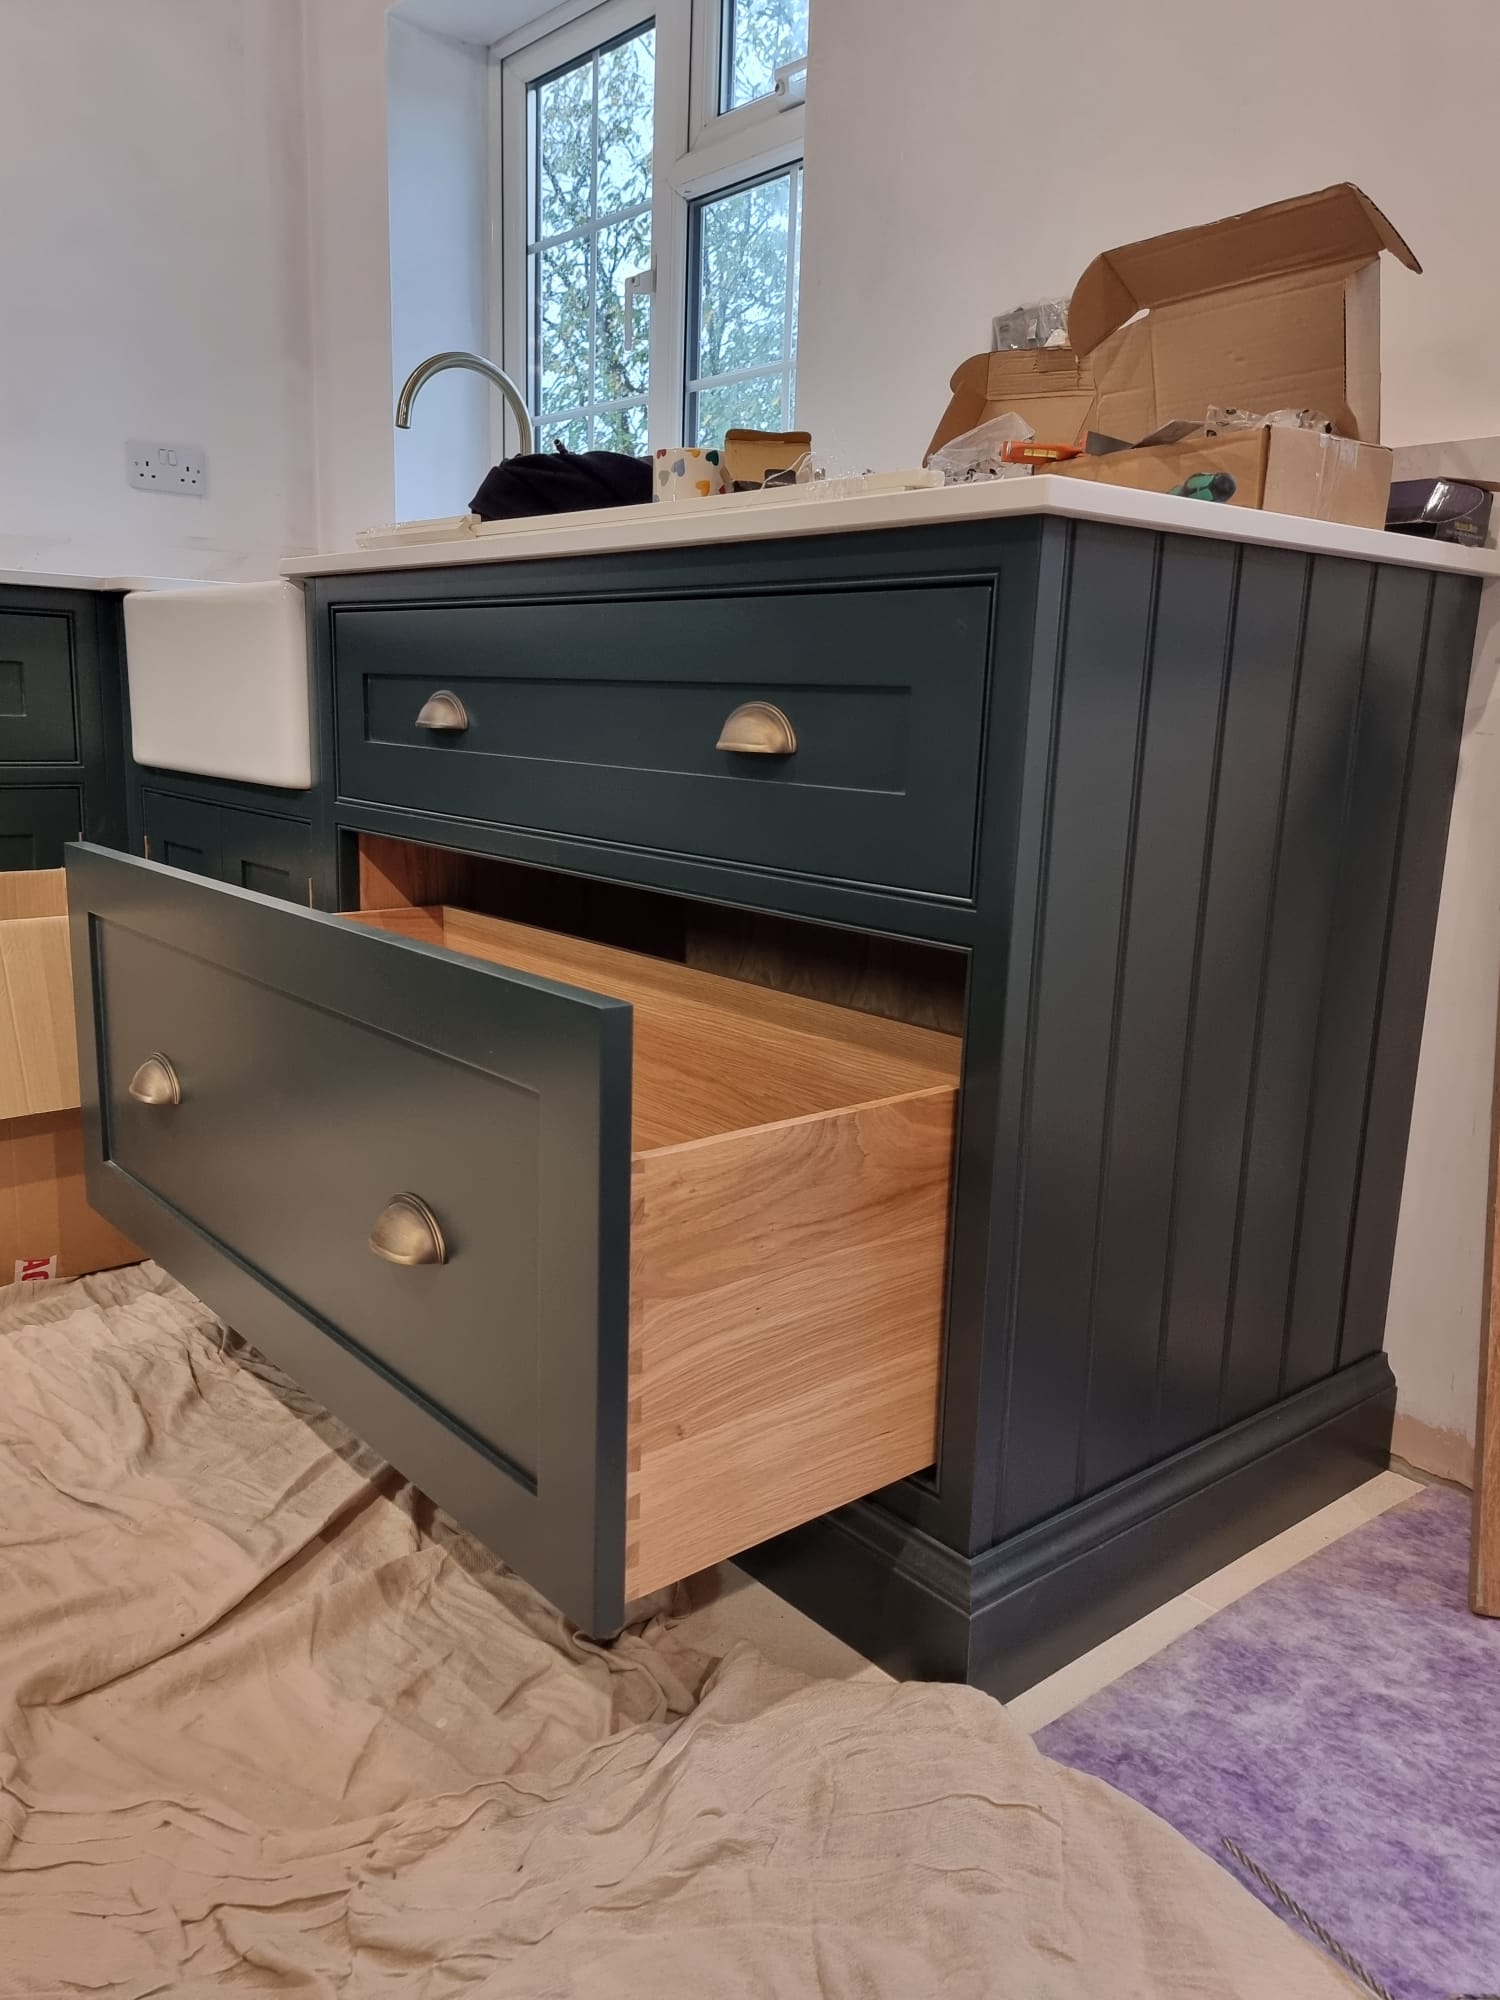 Bespoke timber utility storage unit by Kings Stag Joinery